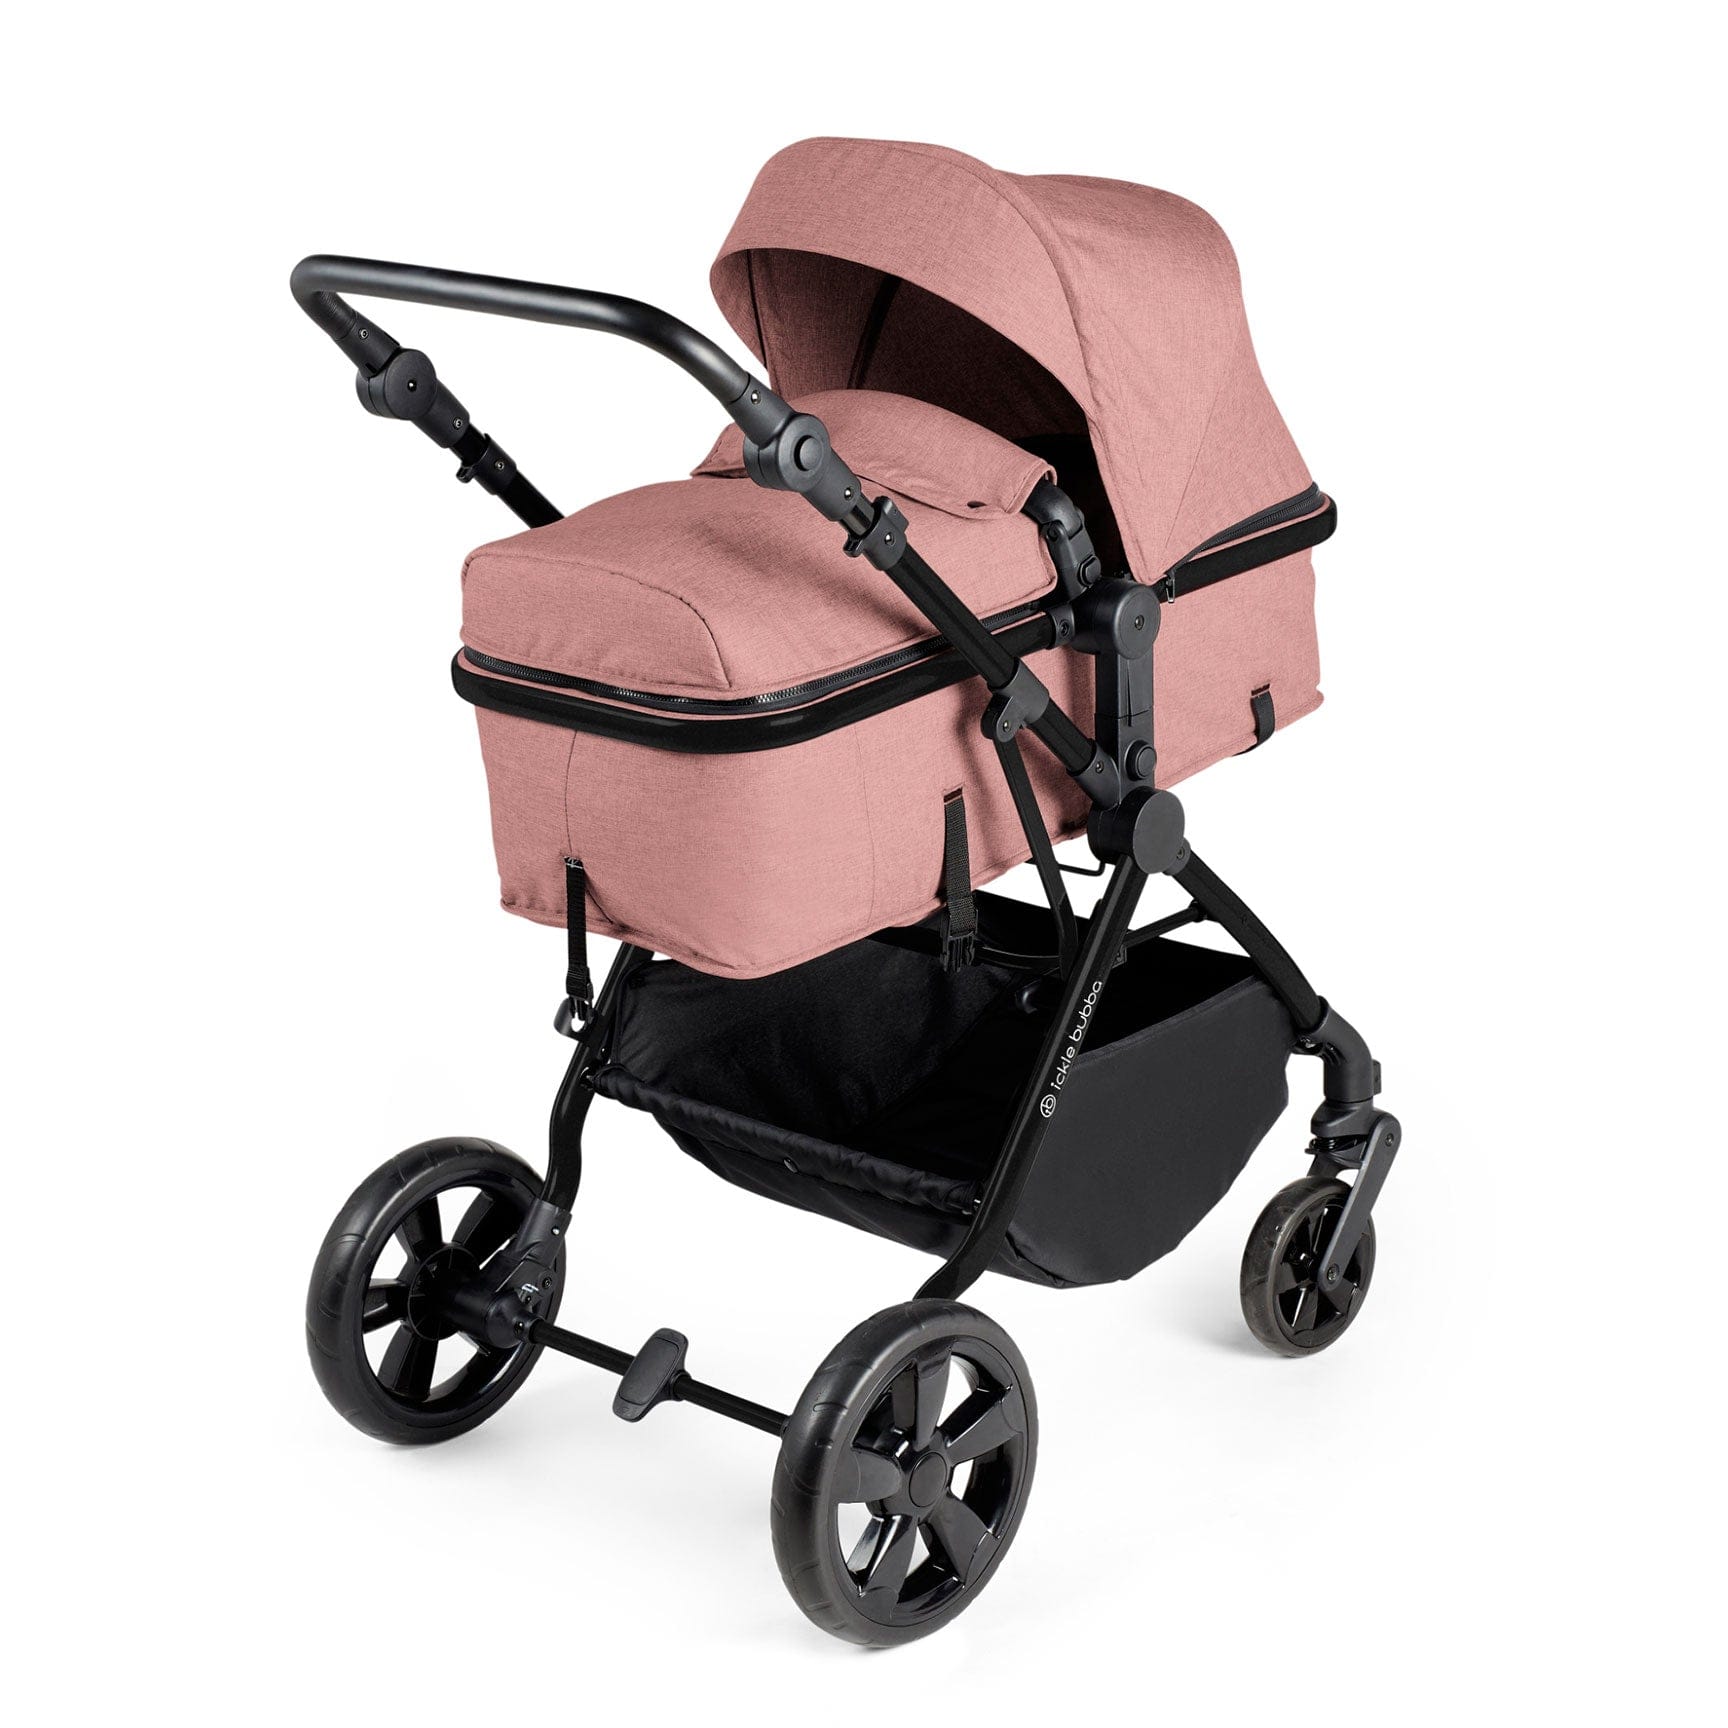 Ickle Bubba Comet 2-in-1 Plus Carrycot & Pushchair in Dusty Pink Baby Prams 10-008-001-134 5056515025682